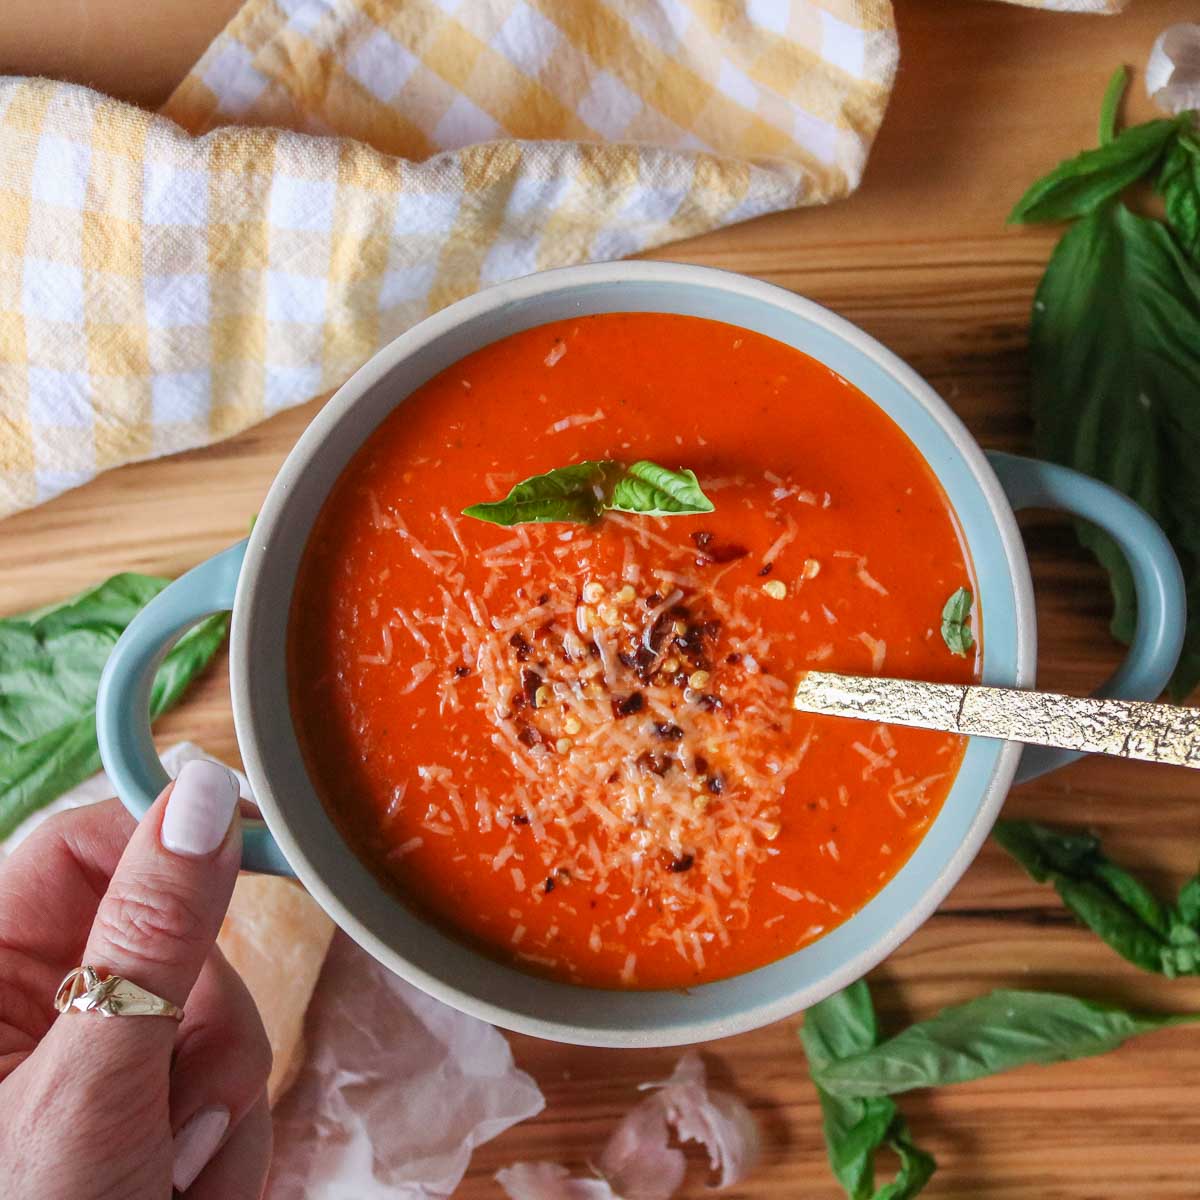 Hand holding a bowl of creamy tomato basil soup garnished with cheese, red pepper flakes and basil.